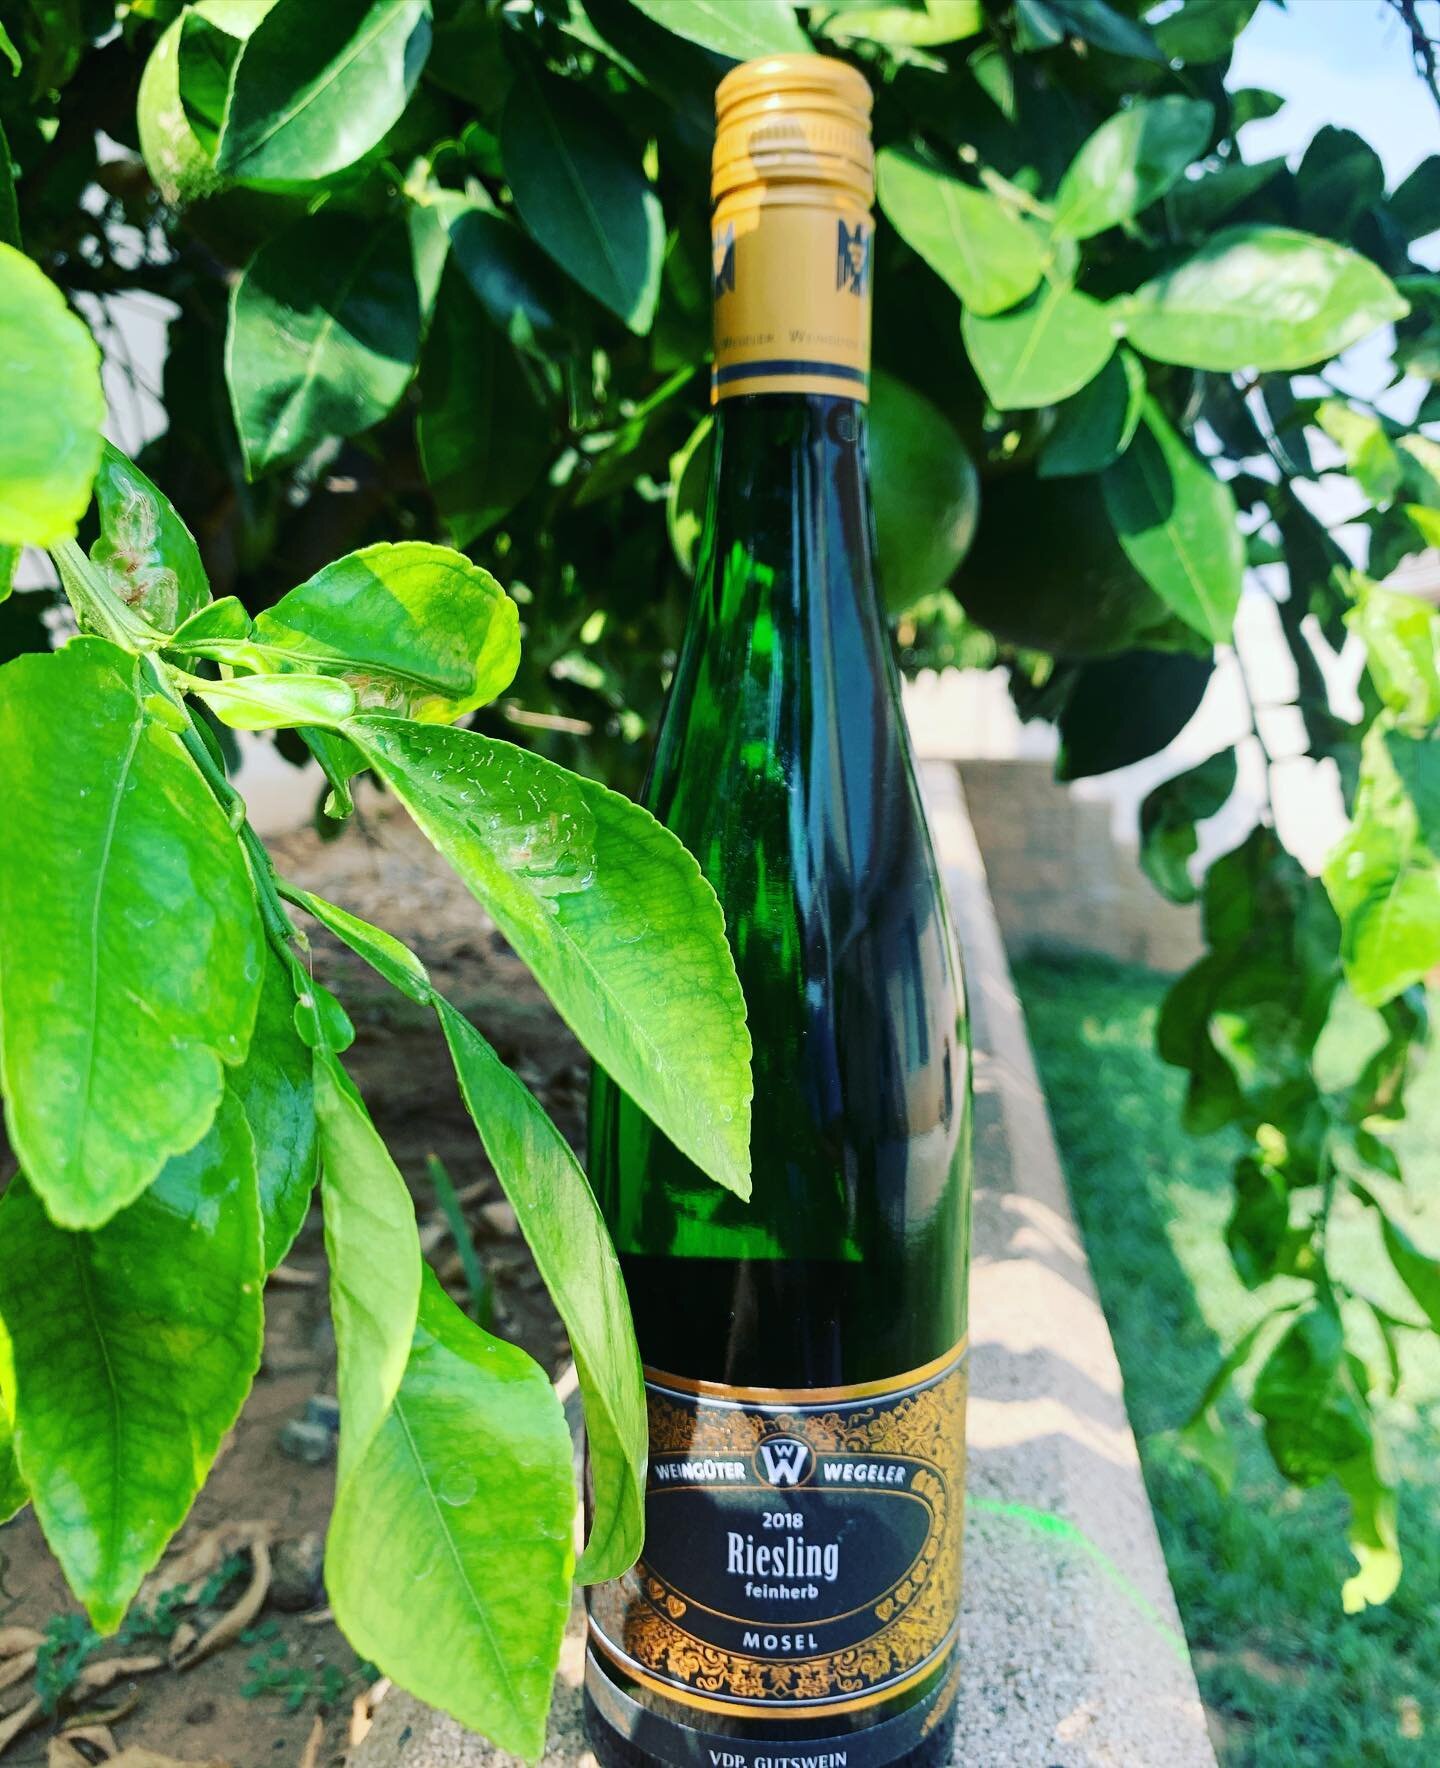 Let&rsquo;s talk Riesling! 
It gets such a bad rap as this uber sweet beginner drinker wine, but in Germany, Riesling is a superstar💫 
They range from very dry (trocken) to sweet (s&uuml;ss) and always have high acid and a mineral, light fruit taste